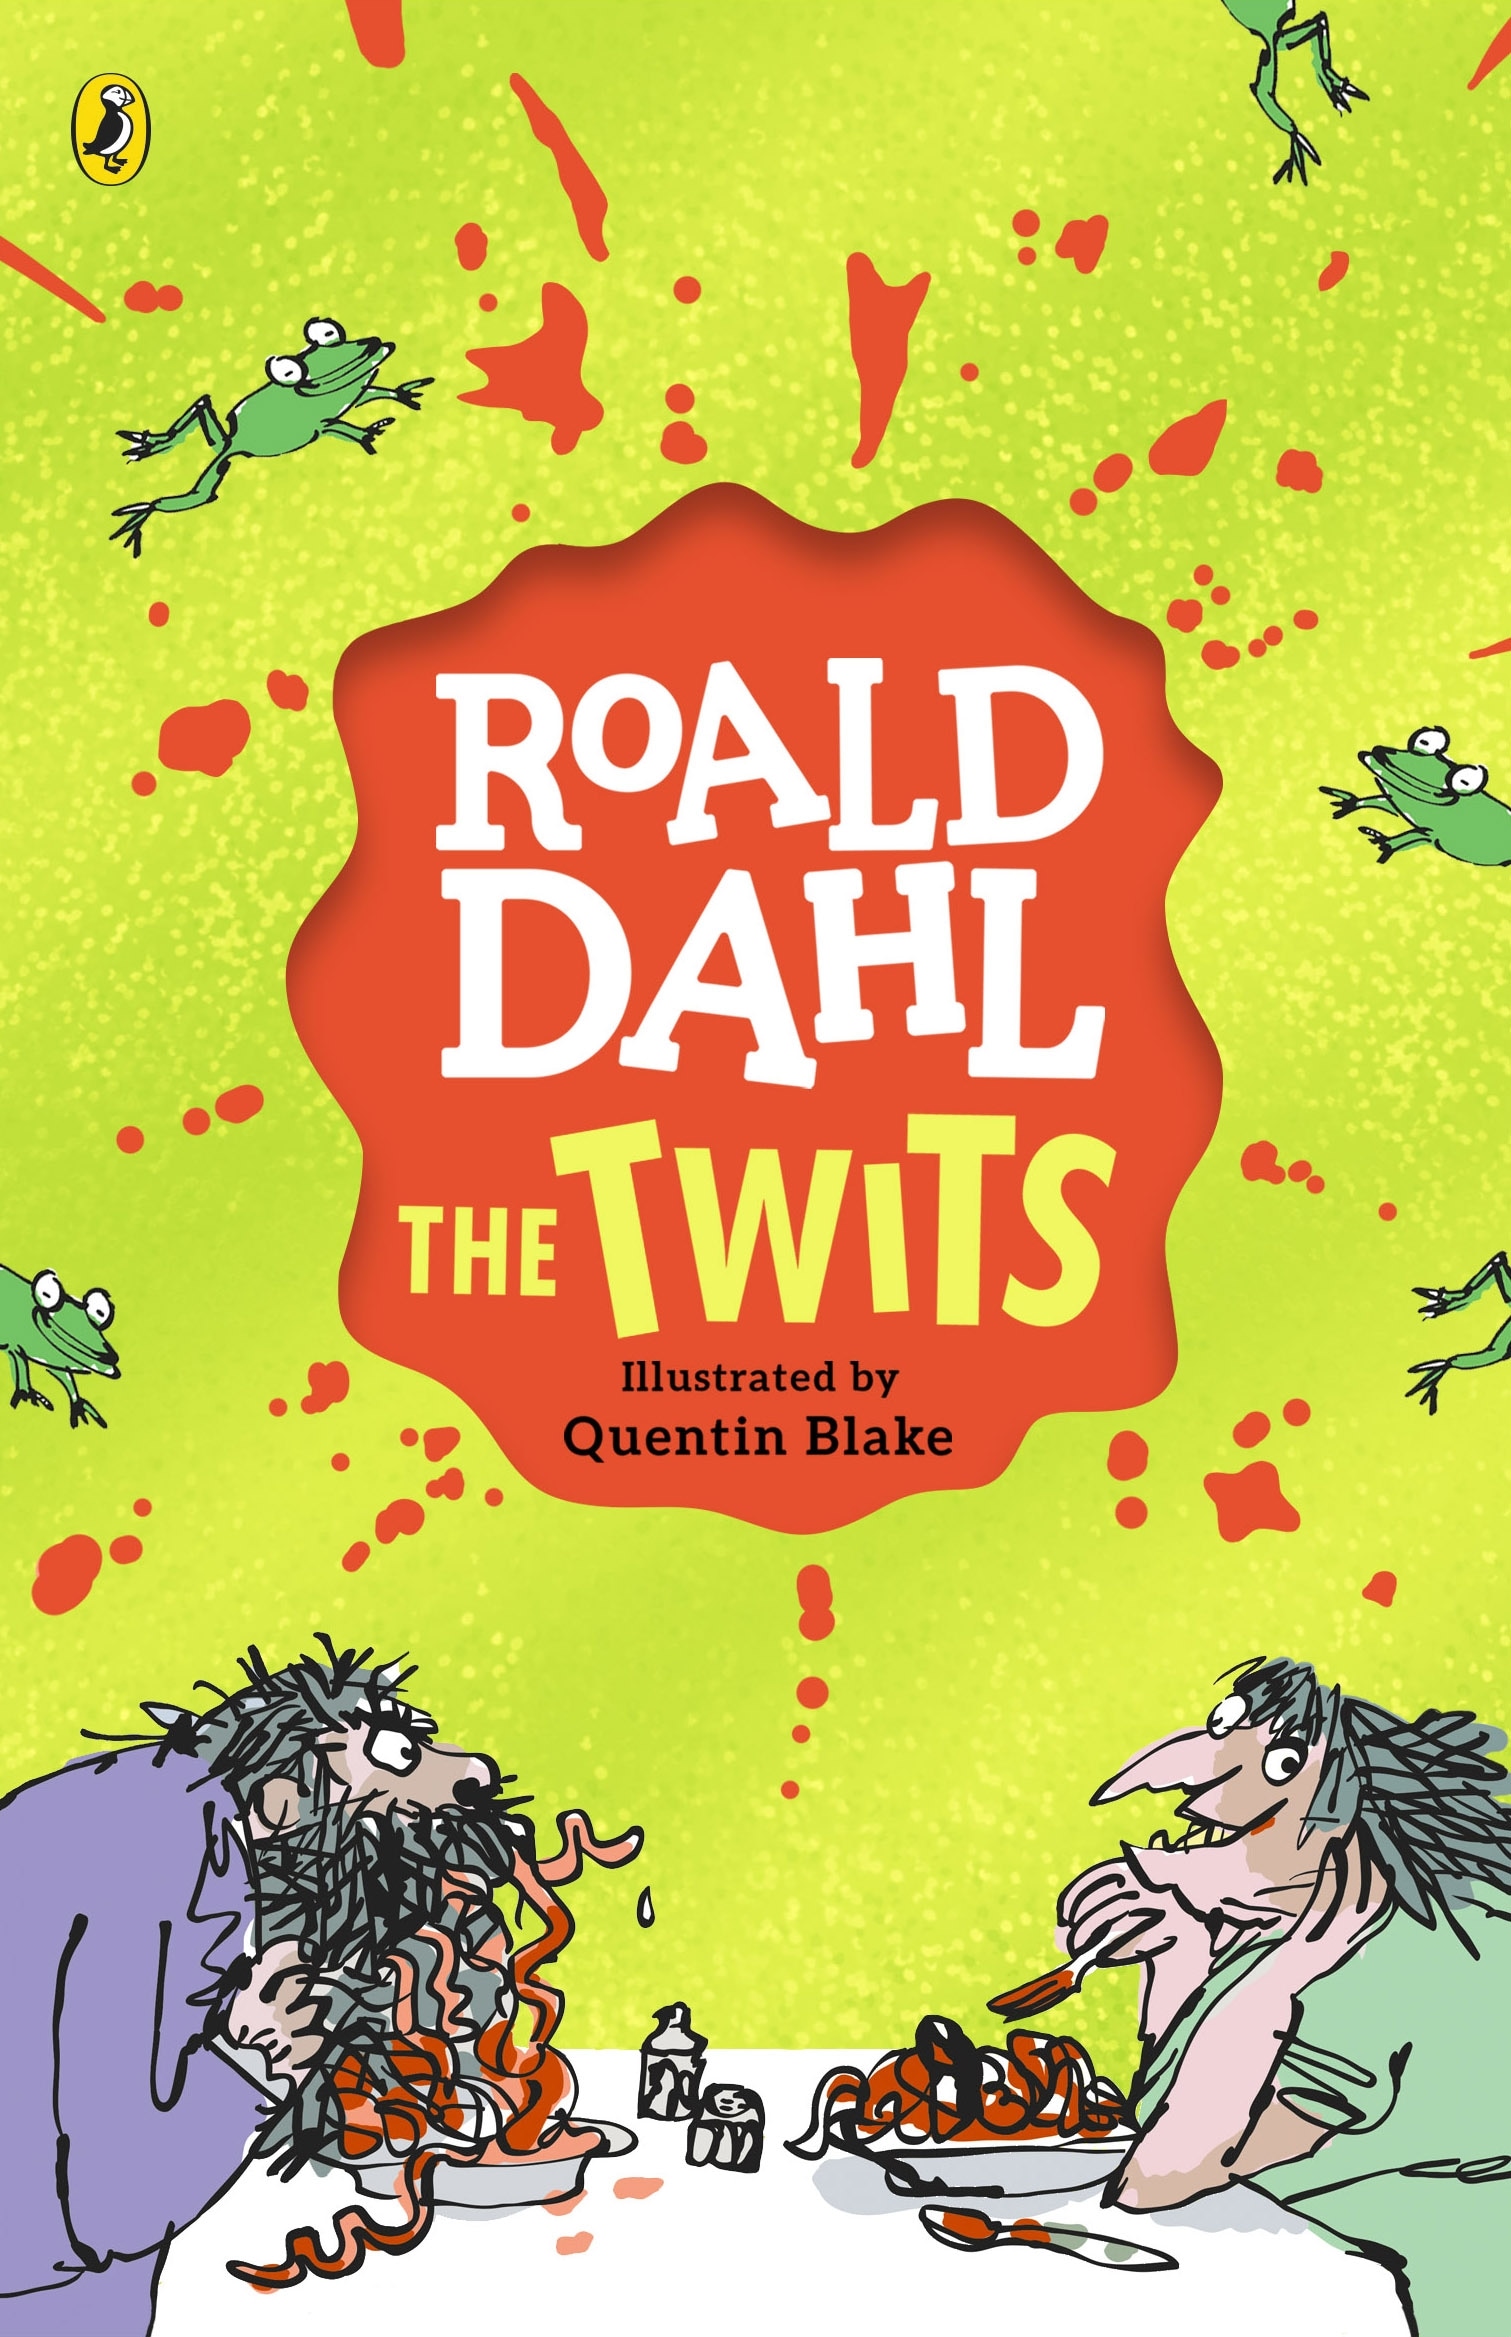 Book “The Twits” by Roald Dahl — February 11, 2016